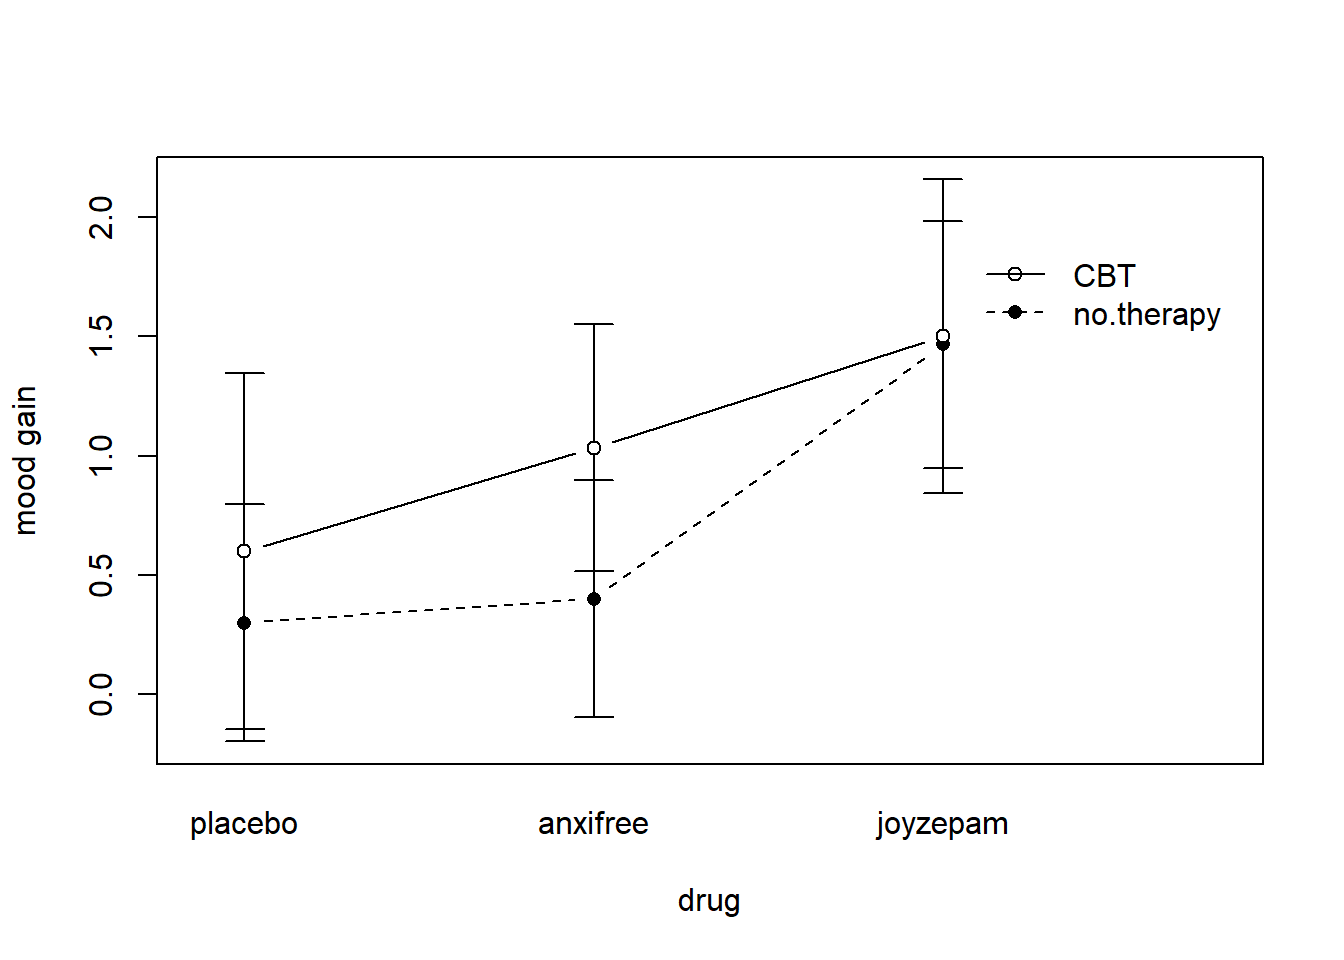 An interaction plot for the group means in the clinical trial data. The command to produce it is included in the main text. You'll notice that the legend doesn't quite fit properly. You can fix this by playing around with the `x.leg` and `y.leg` arguments: type `?lineplot.CI` for details.